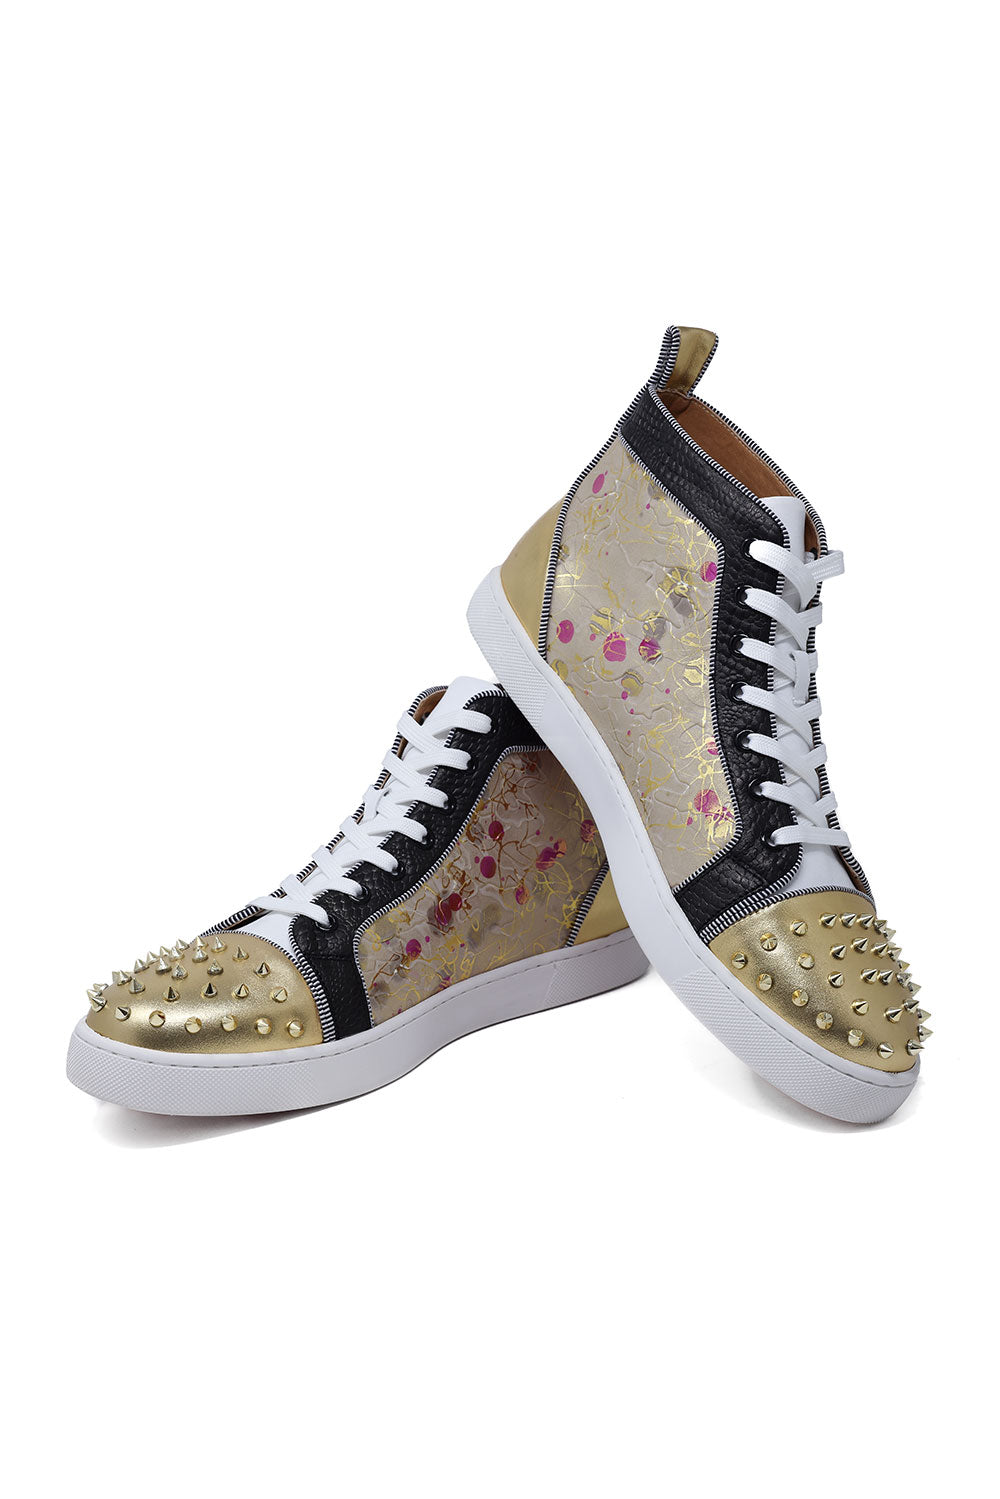 Barabas Men's Spike Floral Shiny Design High-Top Luxury Sneakers SH731